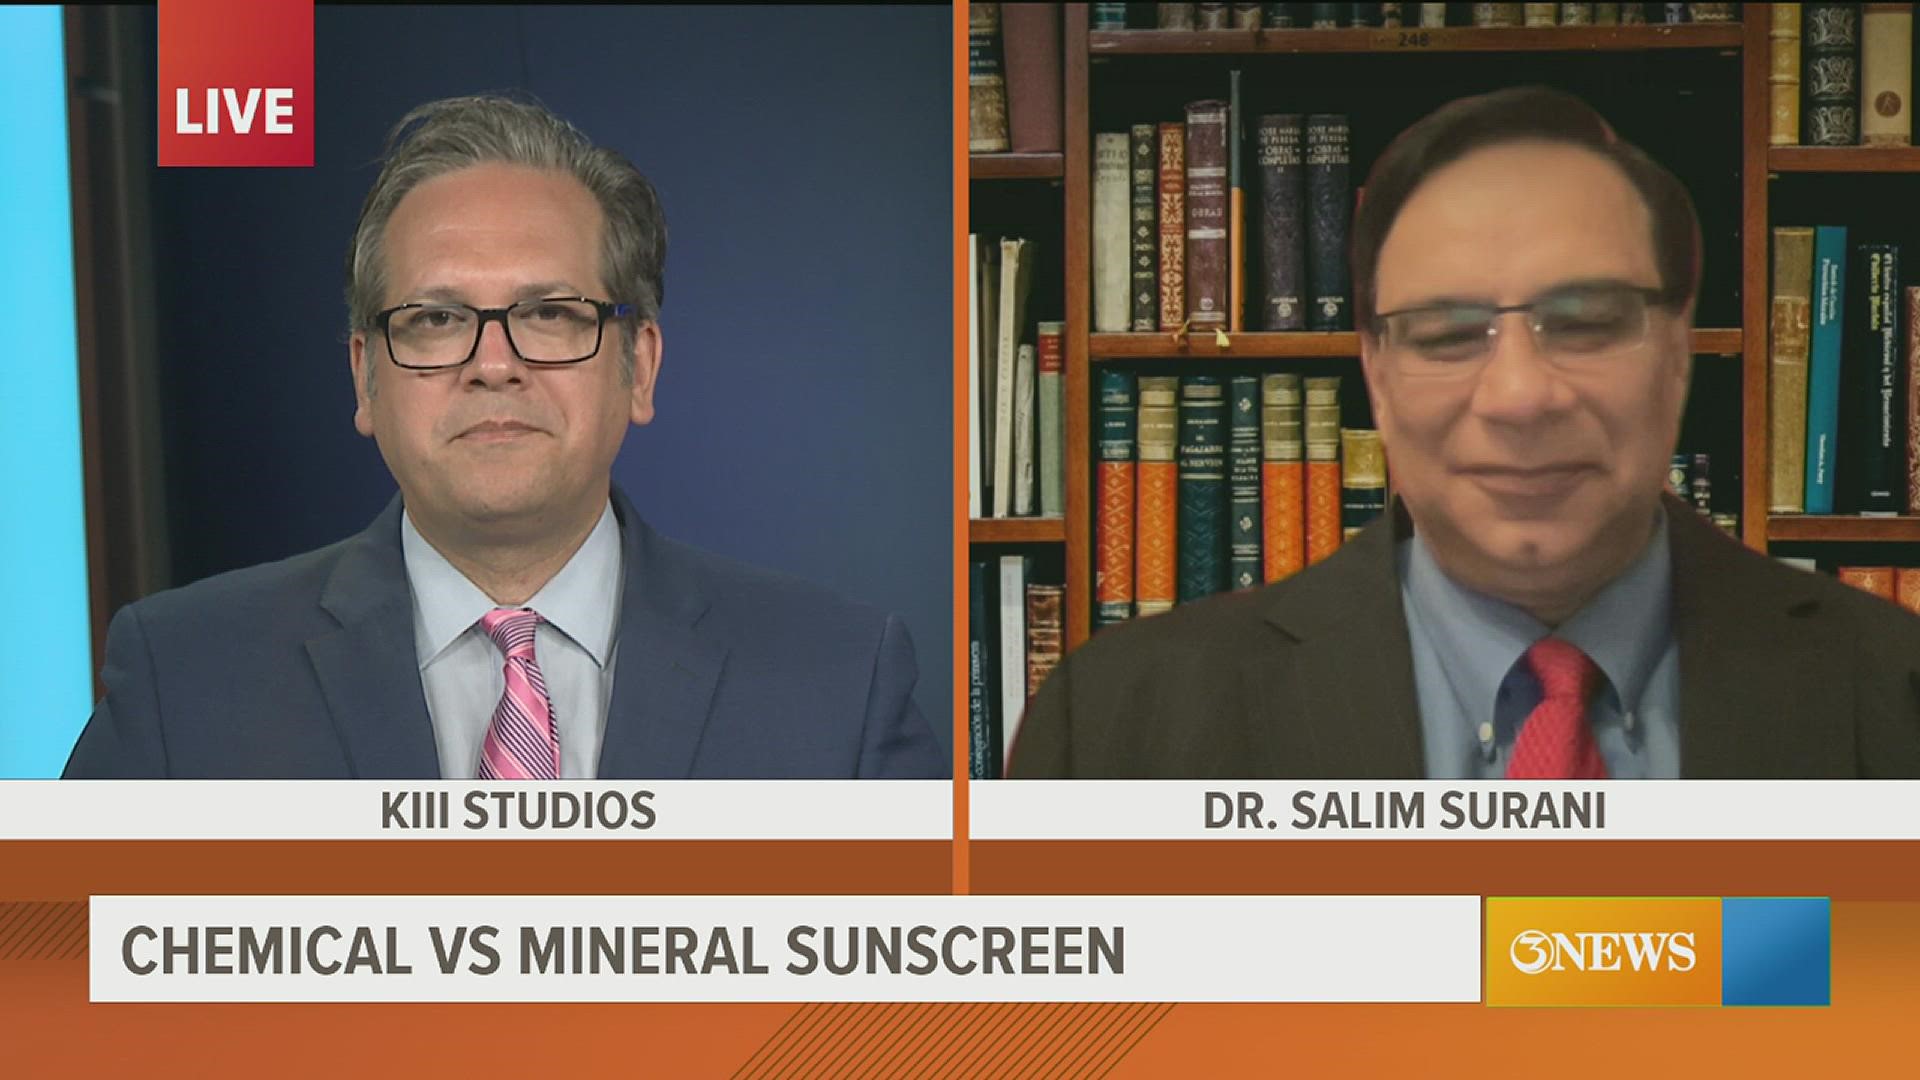 Dr. Surani discuss with KIII about the differences between chemical and mineral sunscreen.